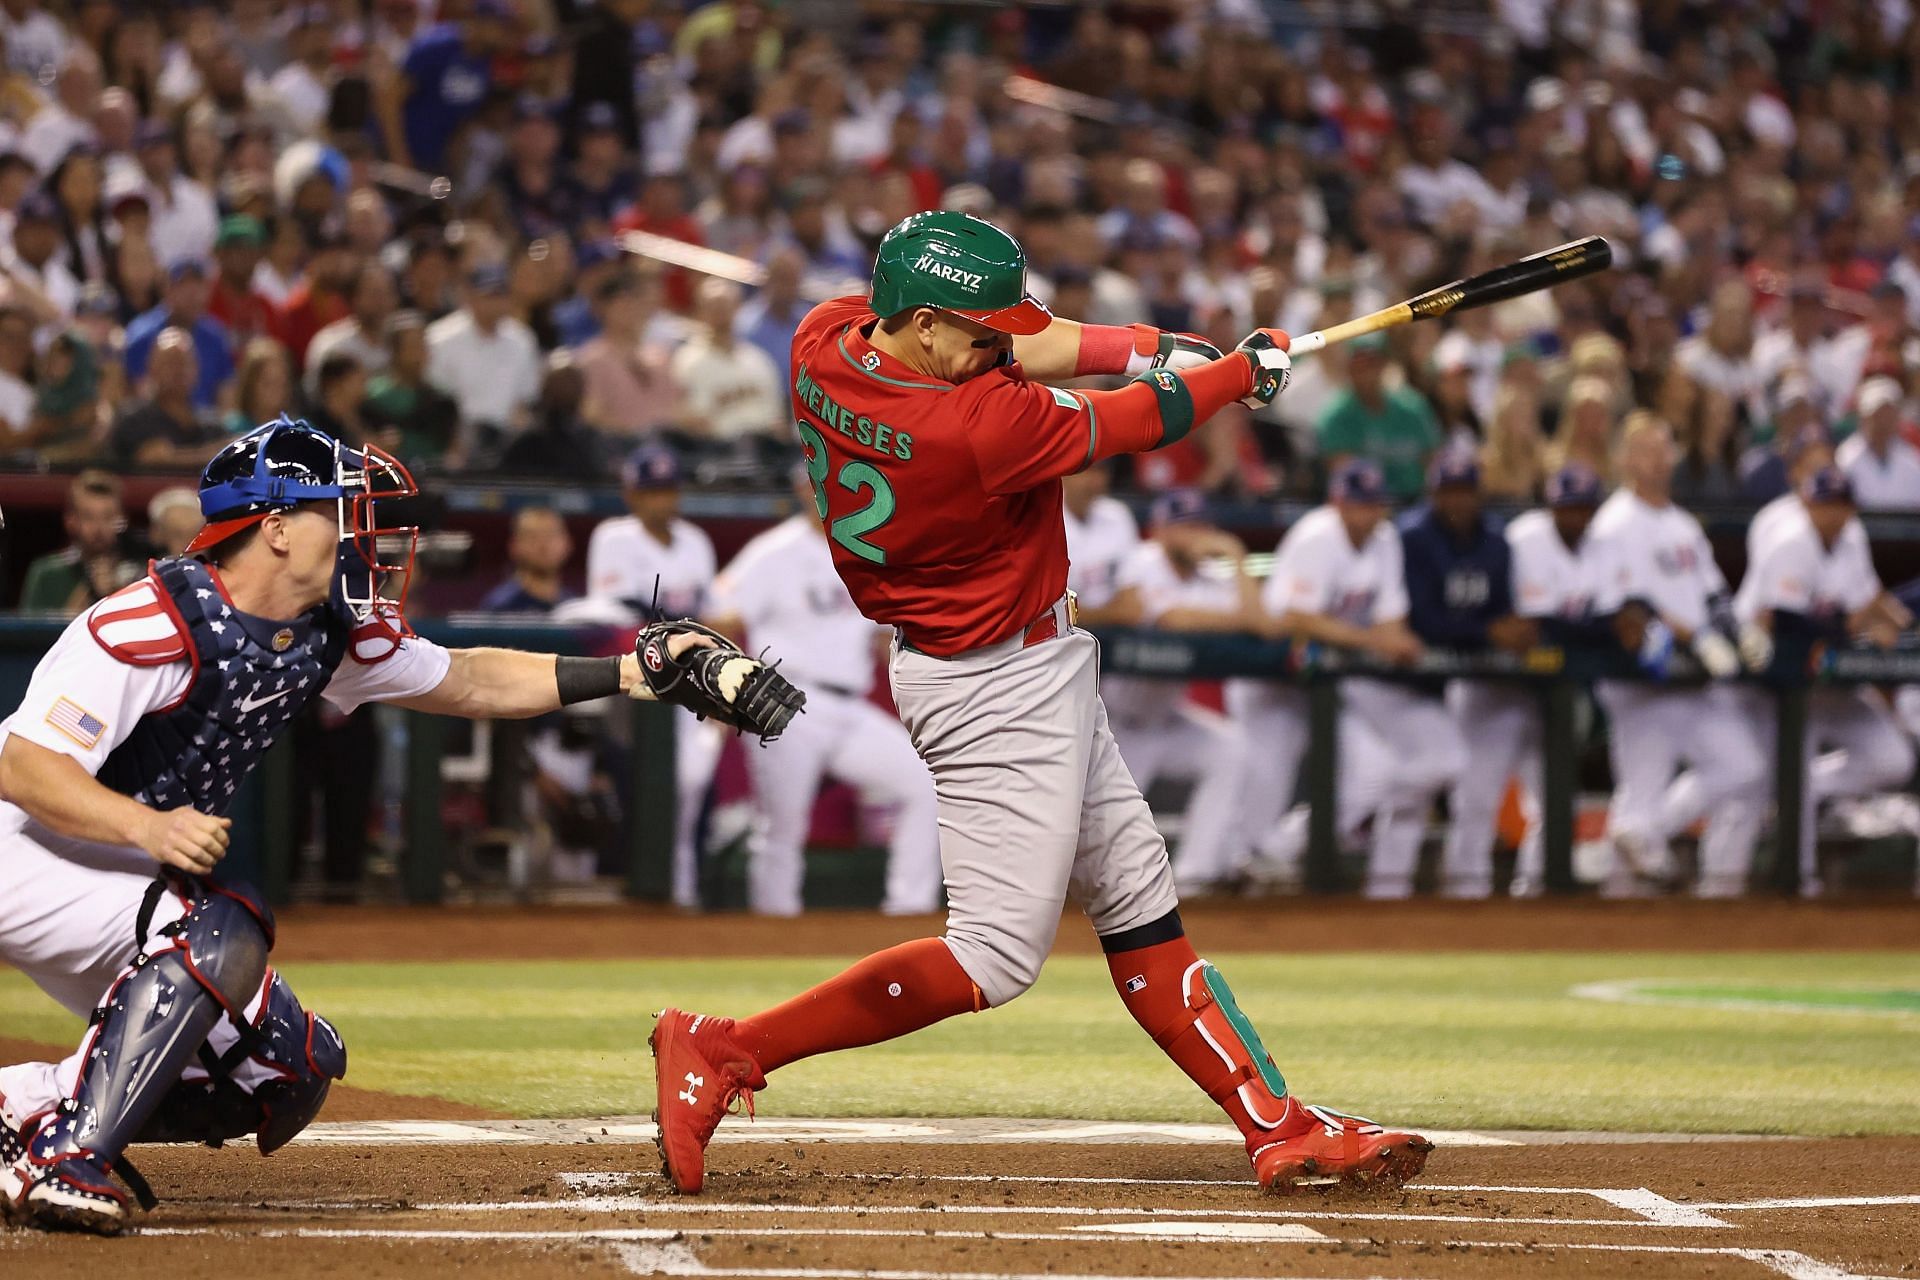 MLB News: While Mexico thrive at the World Baseball Classic, their